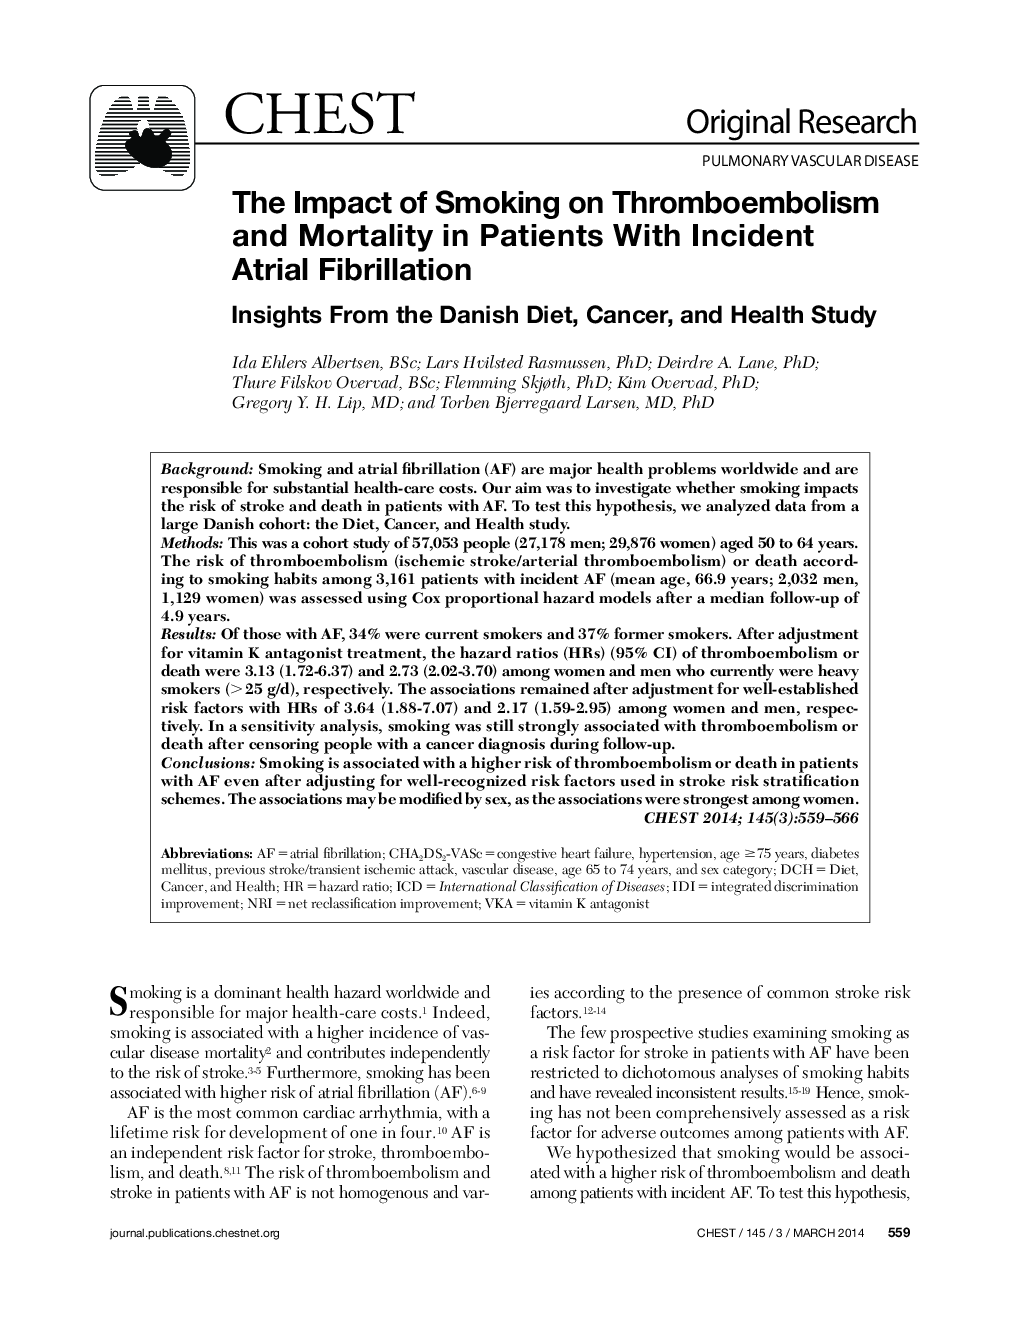 The Impact of Smoking on Thromboembolism and Mortality in Patients With Incident Atrial Fibrillation 